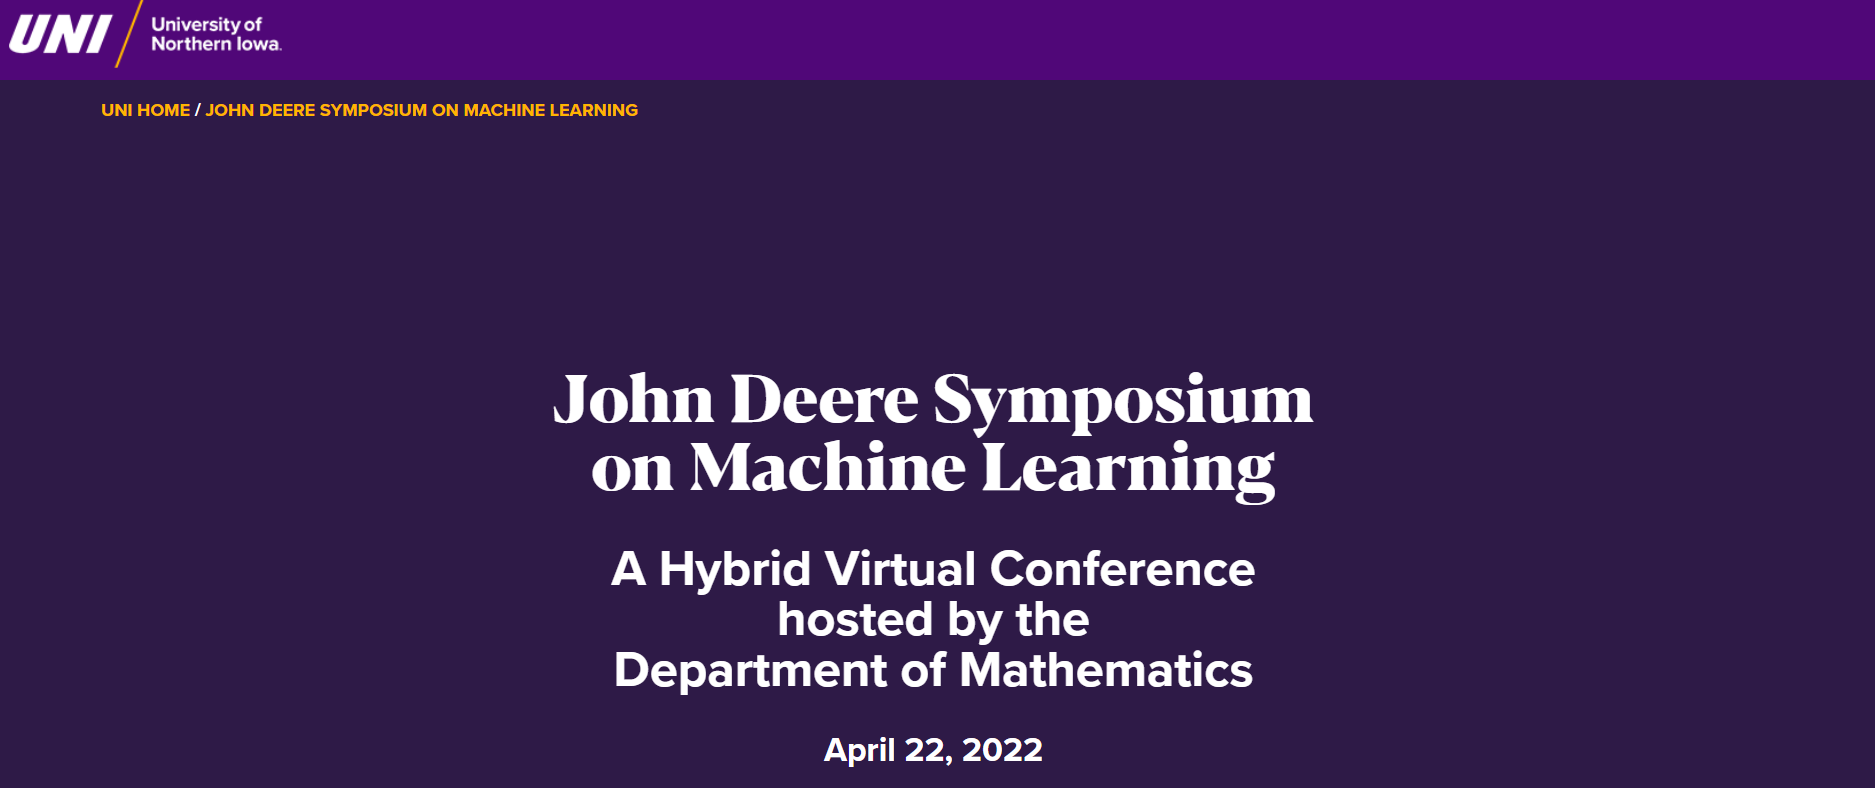 John Deere Symposium on Machine Learning A Hybrid Virtual Conference hosted by the Department of Mathematics April 22, 2022